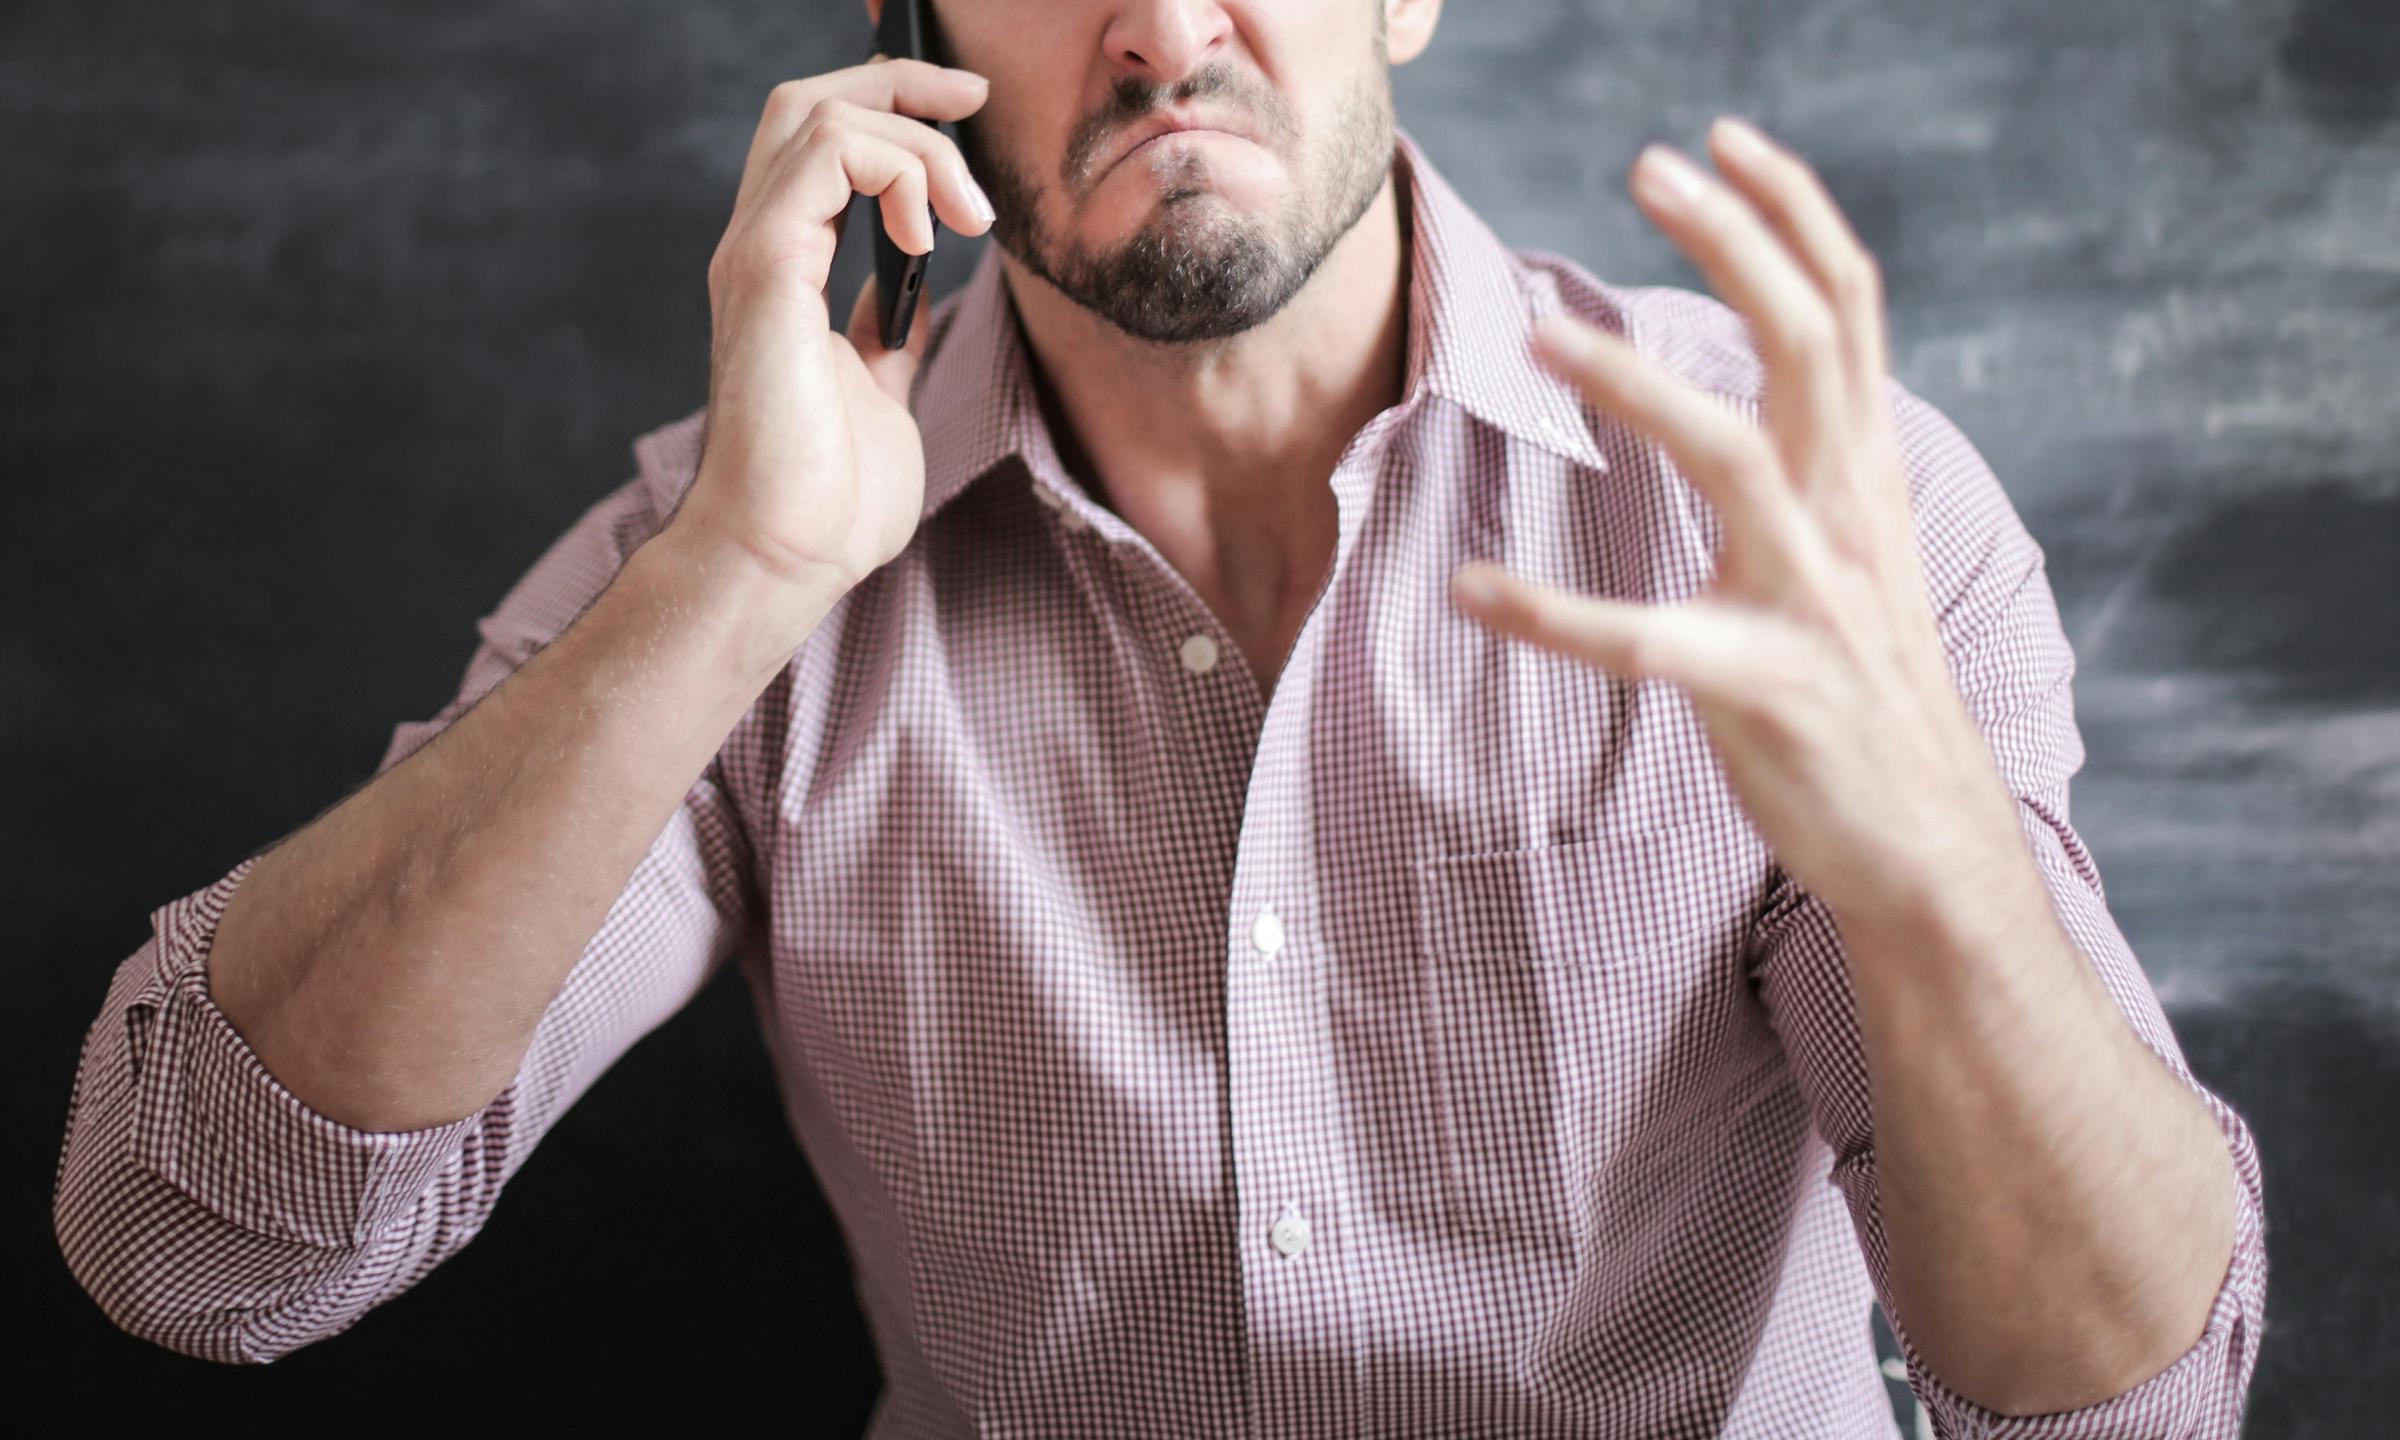 A man reacts angrily while talking on a cell phone | Source: Pexels